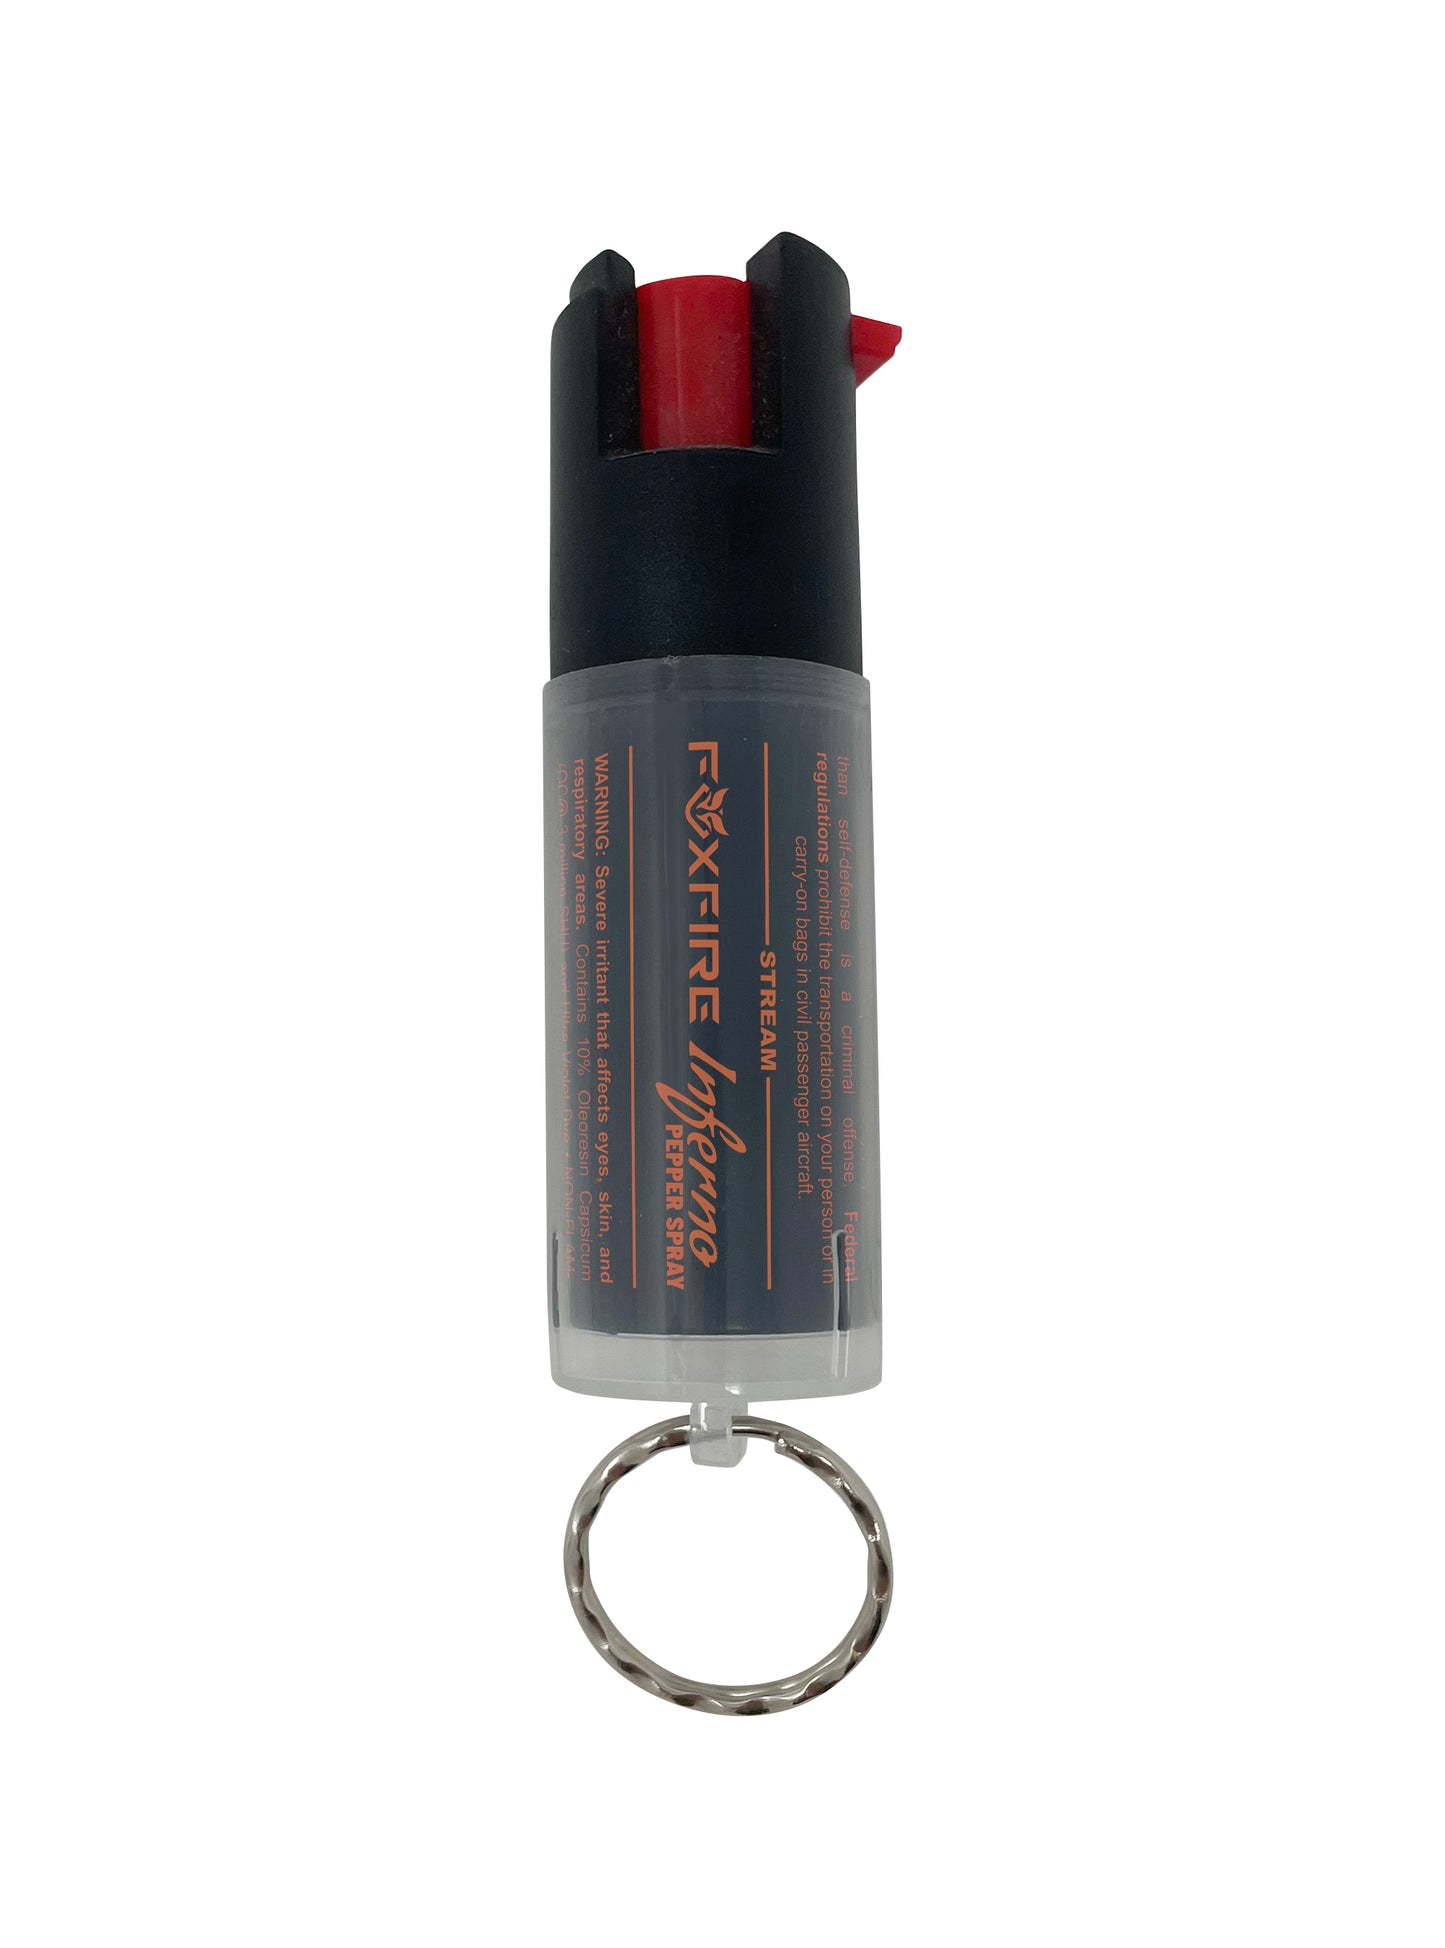 FoxFire® Inferno Pepper Spray (1/2 Ounce Twin Pack) with Key Ring, 1.4MC (Hottest, Stream Spray)